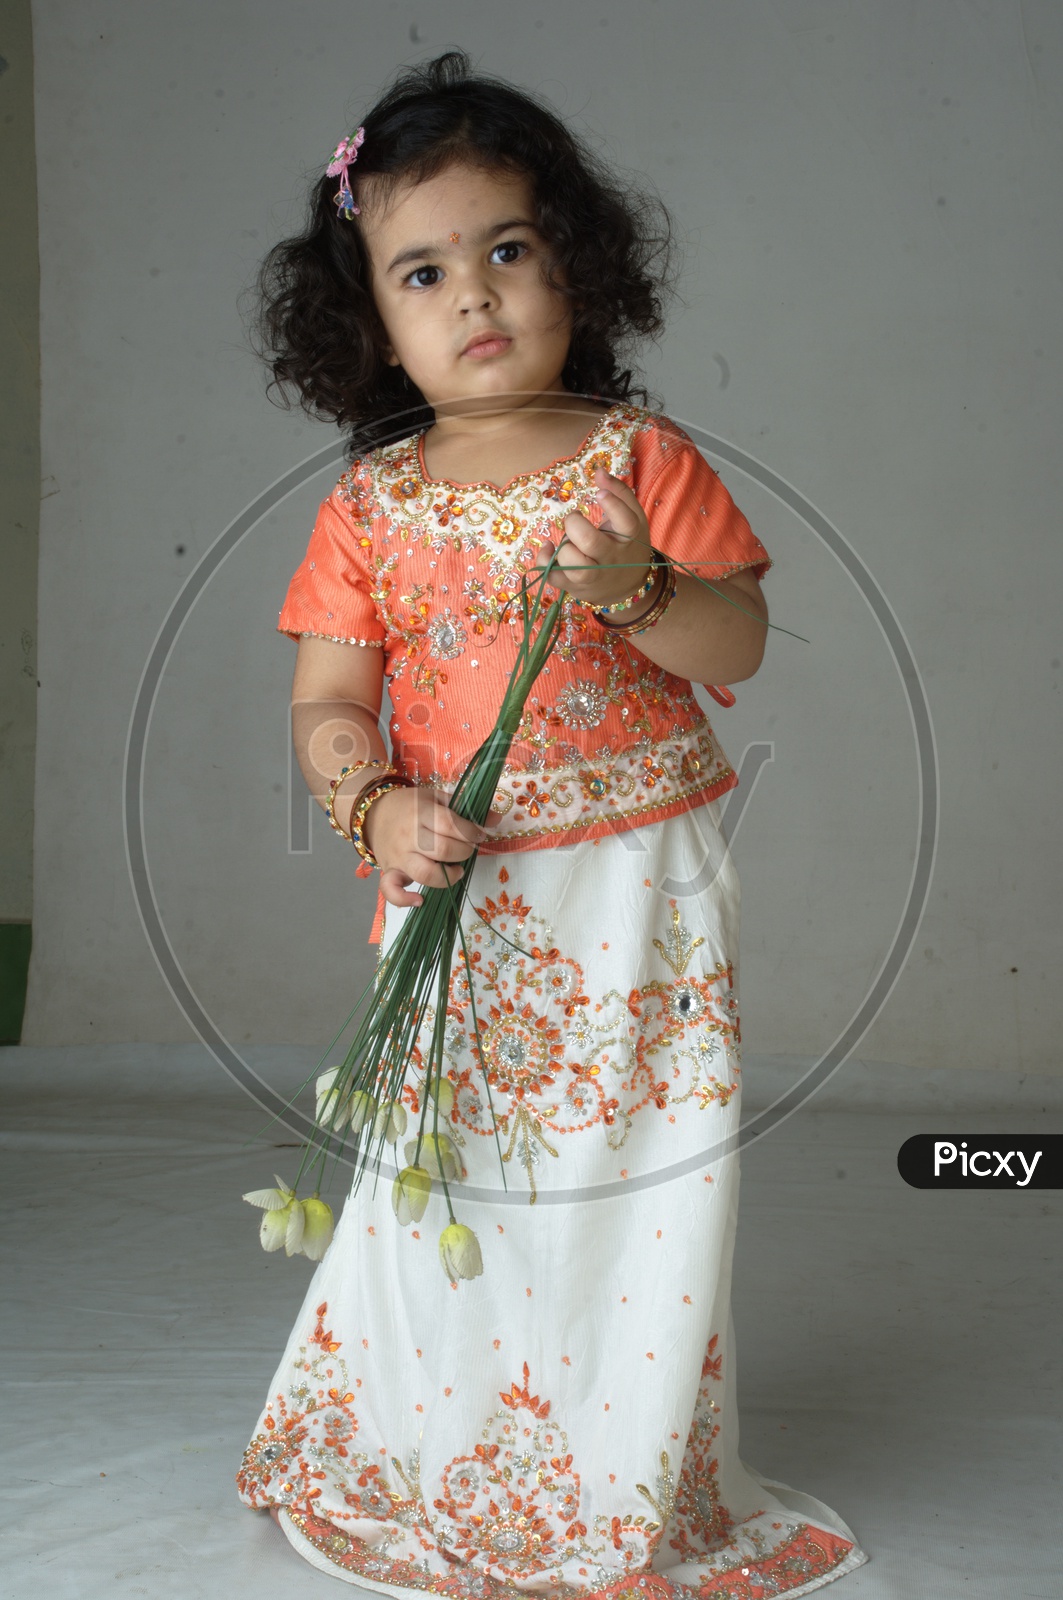 Indian Girl kid in a studio playing with plastic flowers